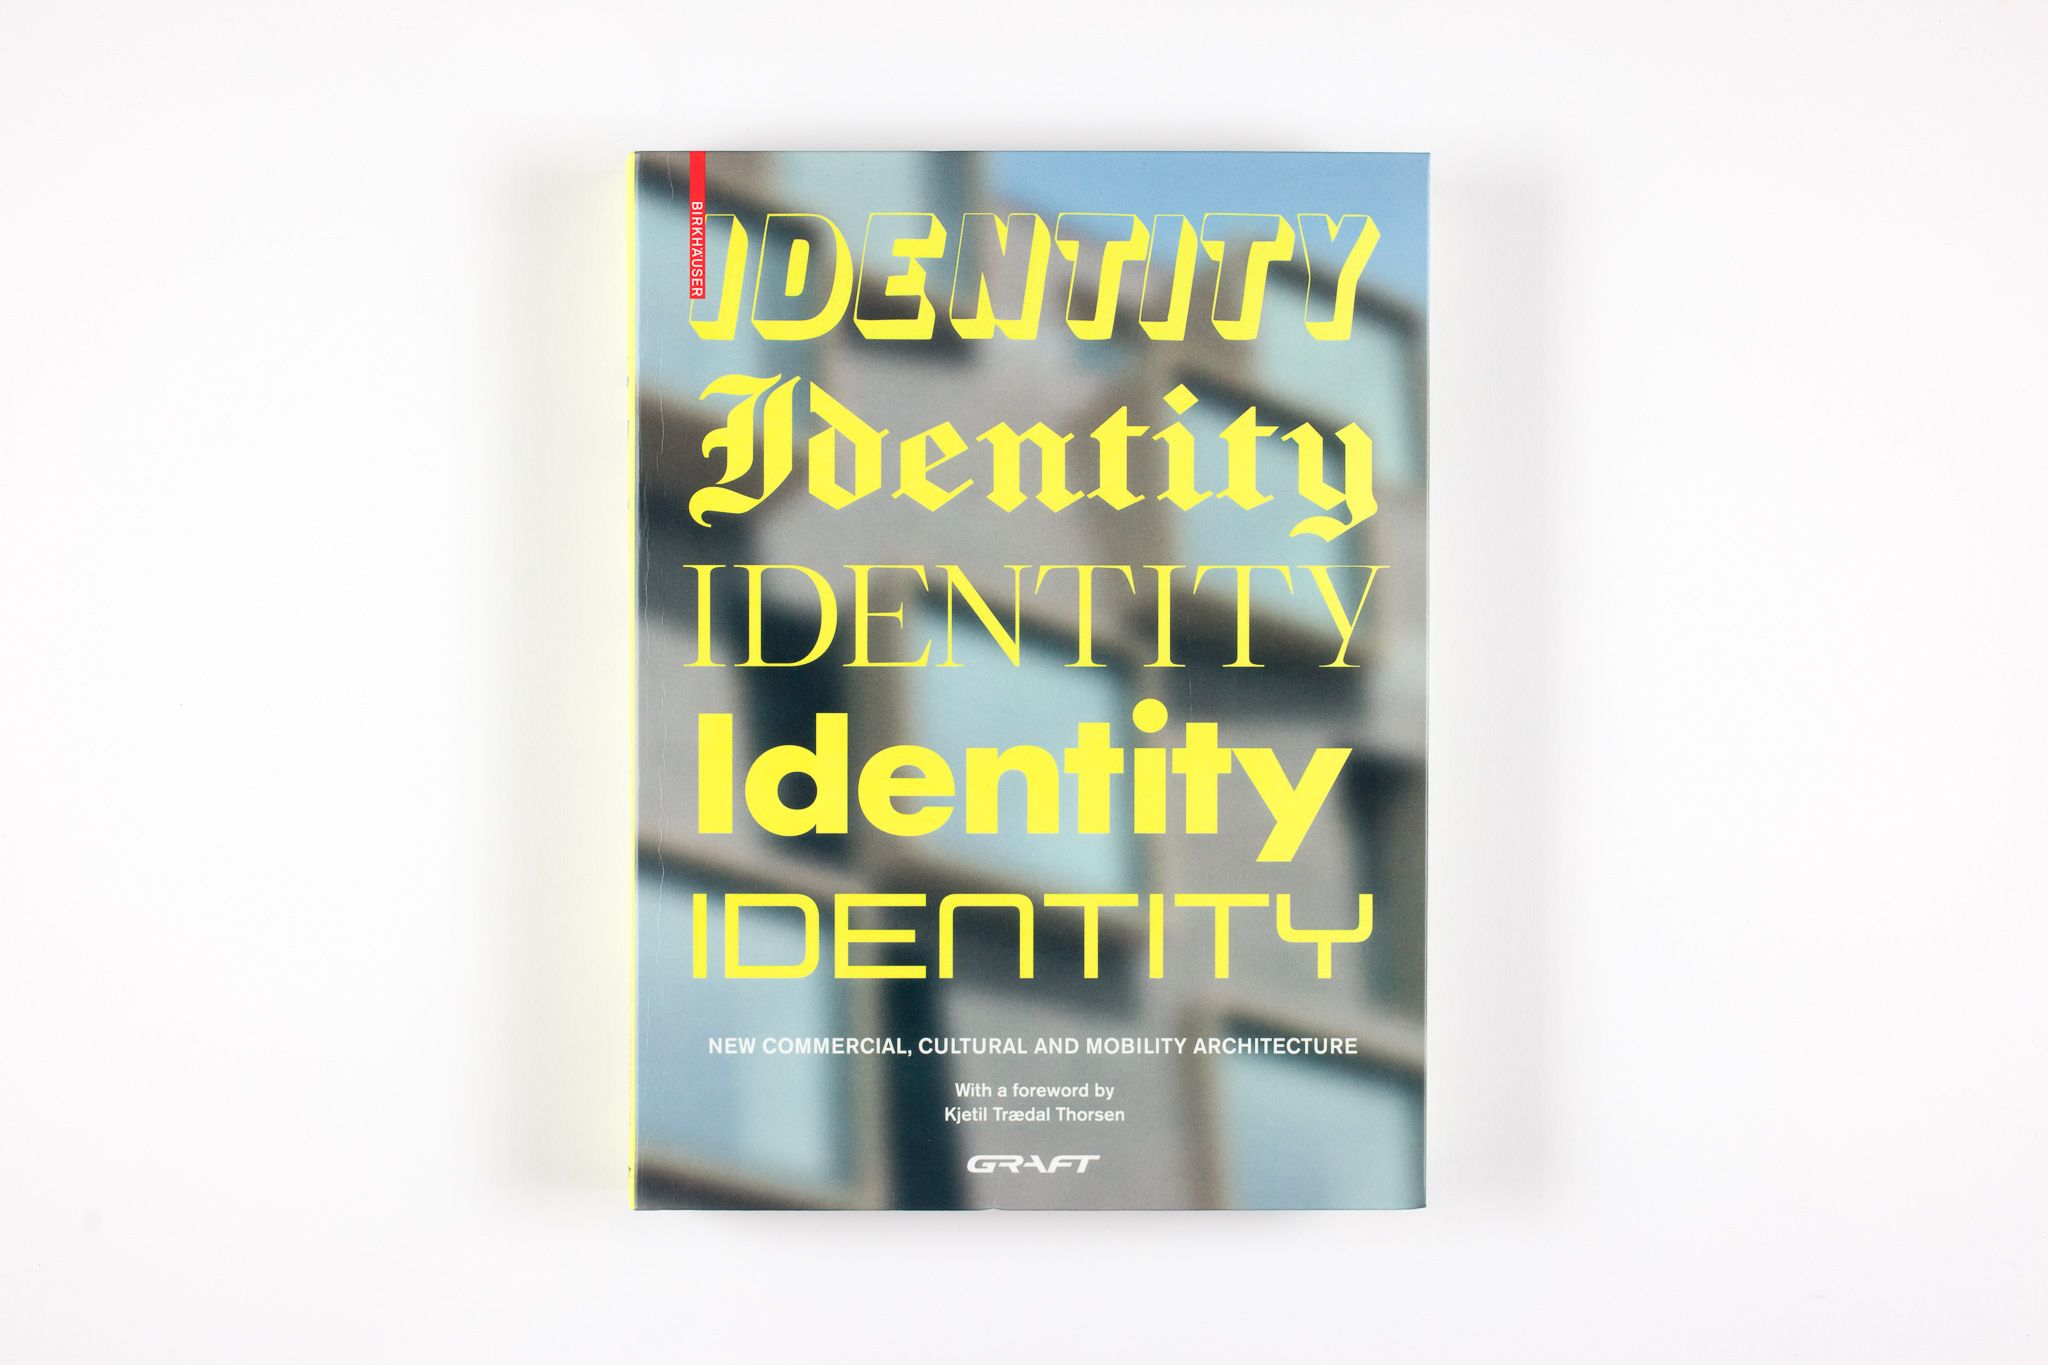 IDENTITY. New Commercial, Cultural and Mobility Architecture Author		GRAFT Project type	Publication Language	English Publisher	Birkhäuser  Paperback	360 pages Published	October 12, 2020  ISBN-10	3035619166 ISBN-13	978-3035619164   The international and multidisciplinary practice GRAFT conceives of itself as a label for architecture, urban design, product design, and music. GRAFT calls itself a "hybrid office" and produces dynamic architectural designs for standard commissions; however, the architects also initiate their own projects and system solutions for tasks with a social, ecological, or esthetic emphasis.